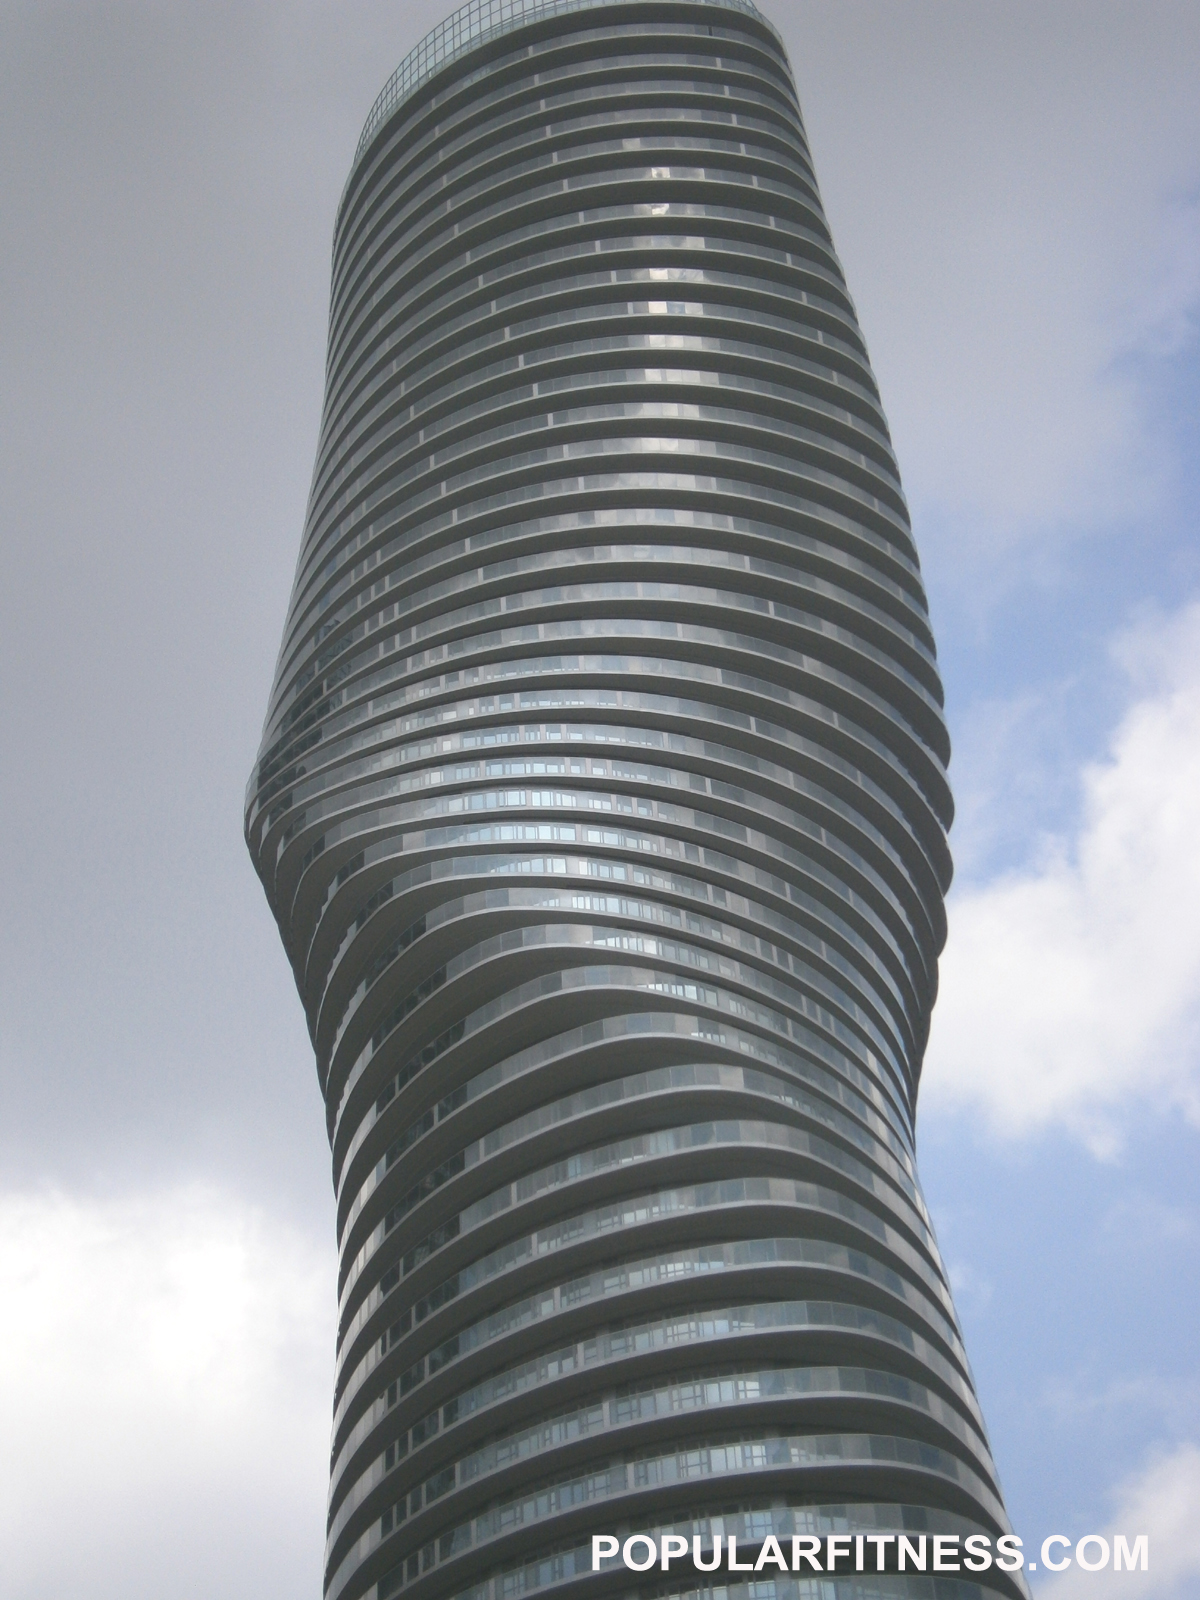 Close-up of Marilyn Monroe Tower - Abloslute Condo Building in Mississauga